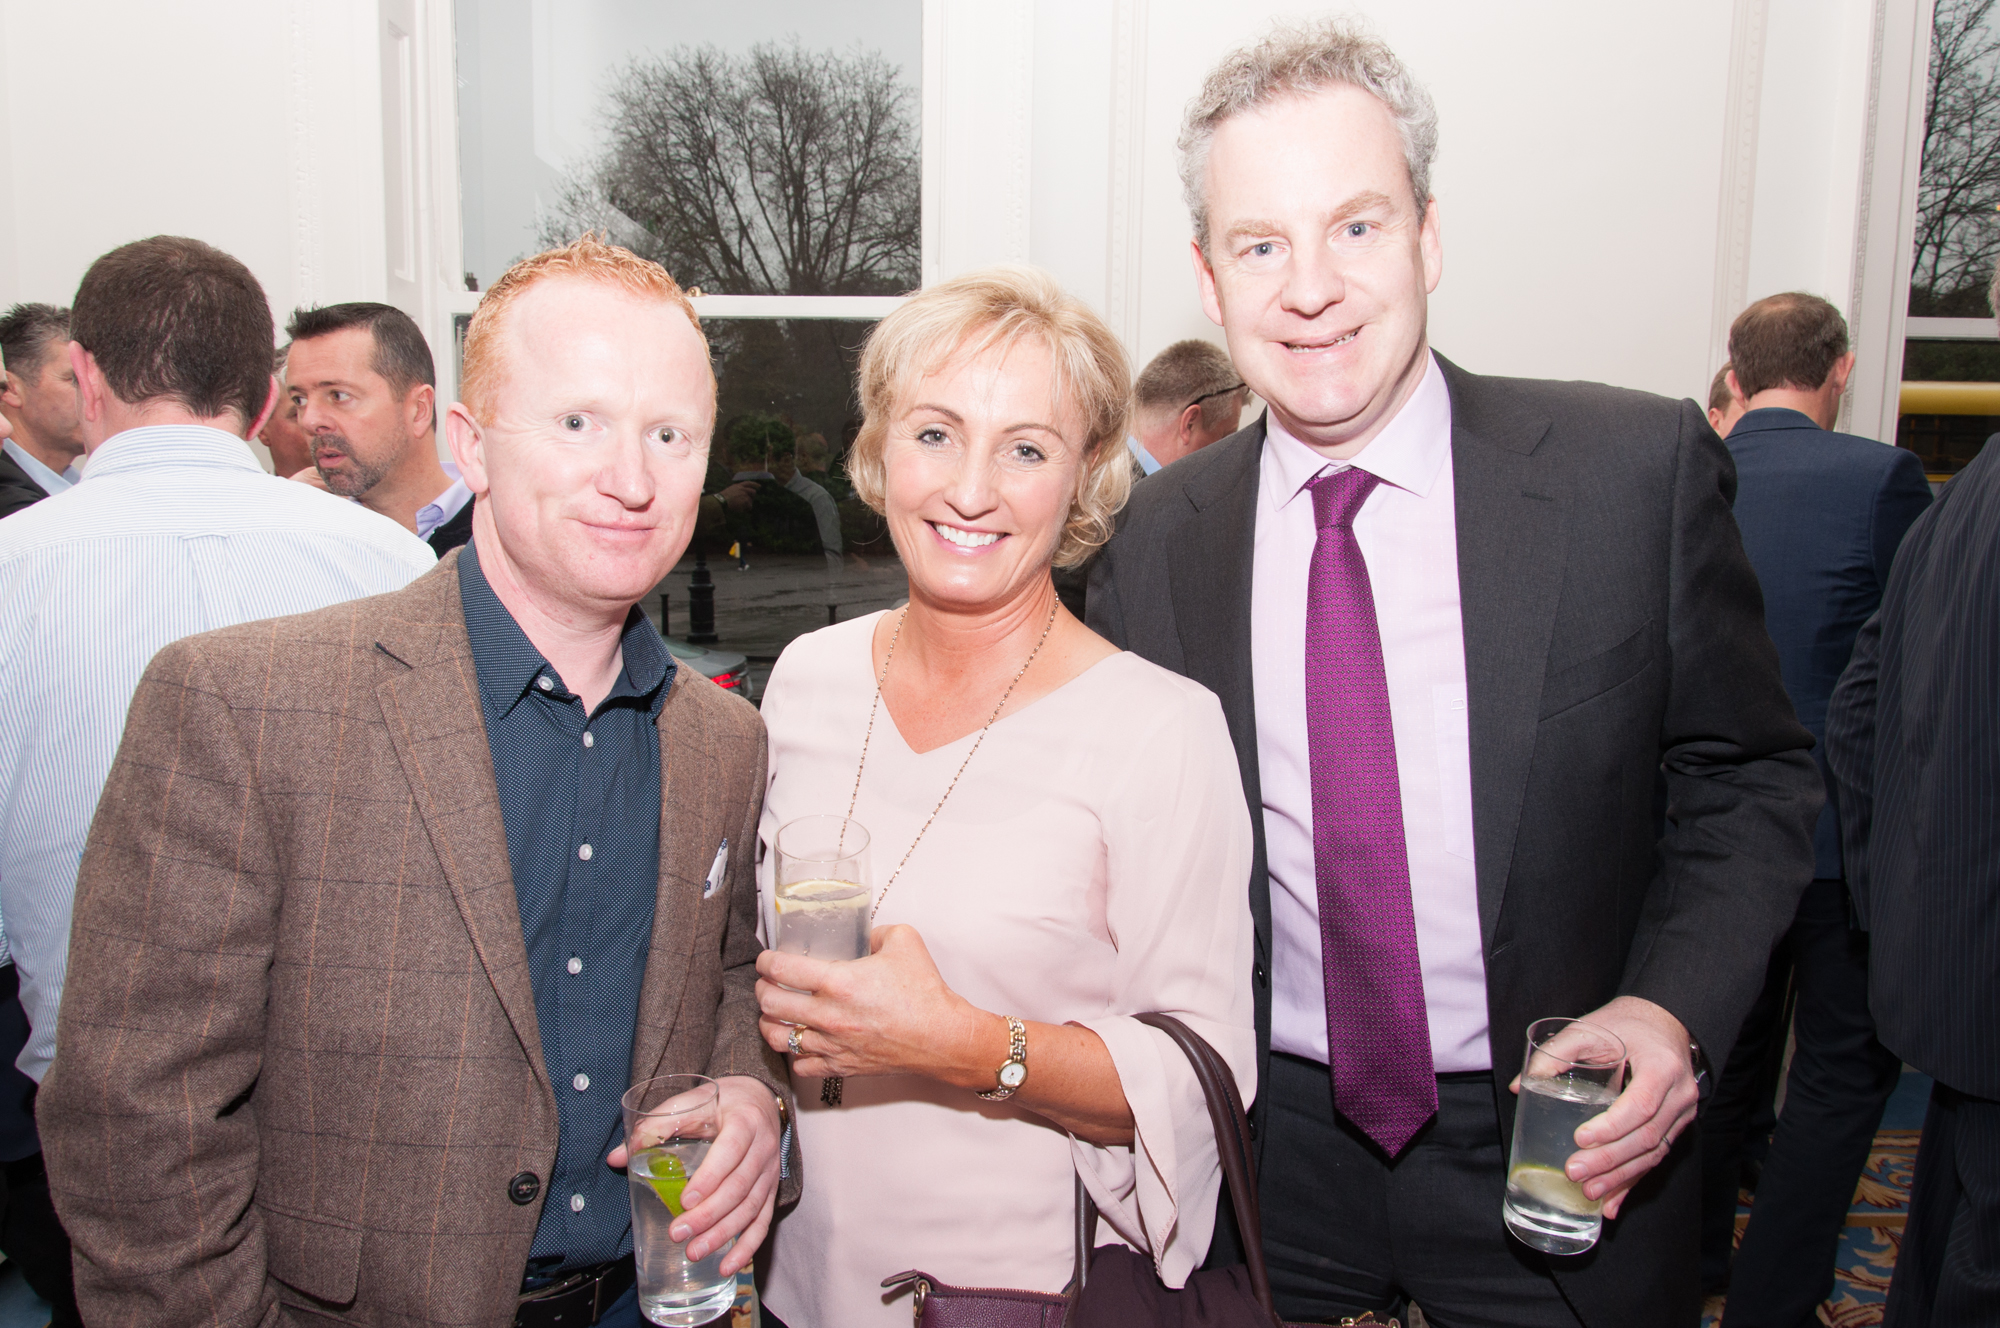 St Gerard's School Past Pupils Union Lunch at Shelbourne Hotel by Natalia Marzec_ low res88